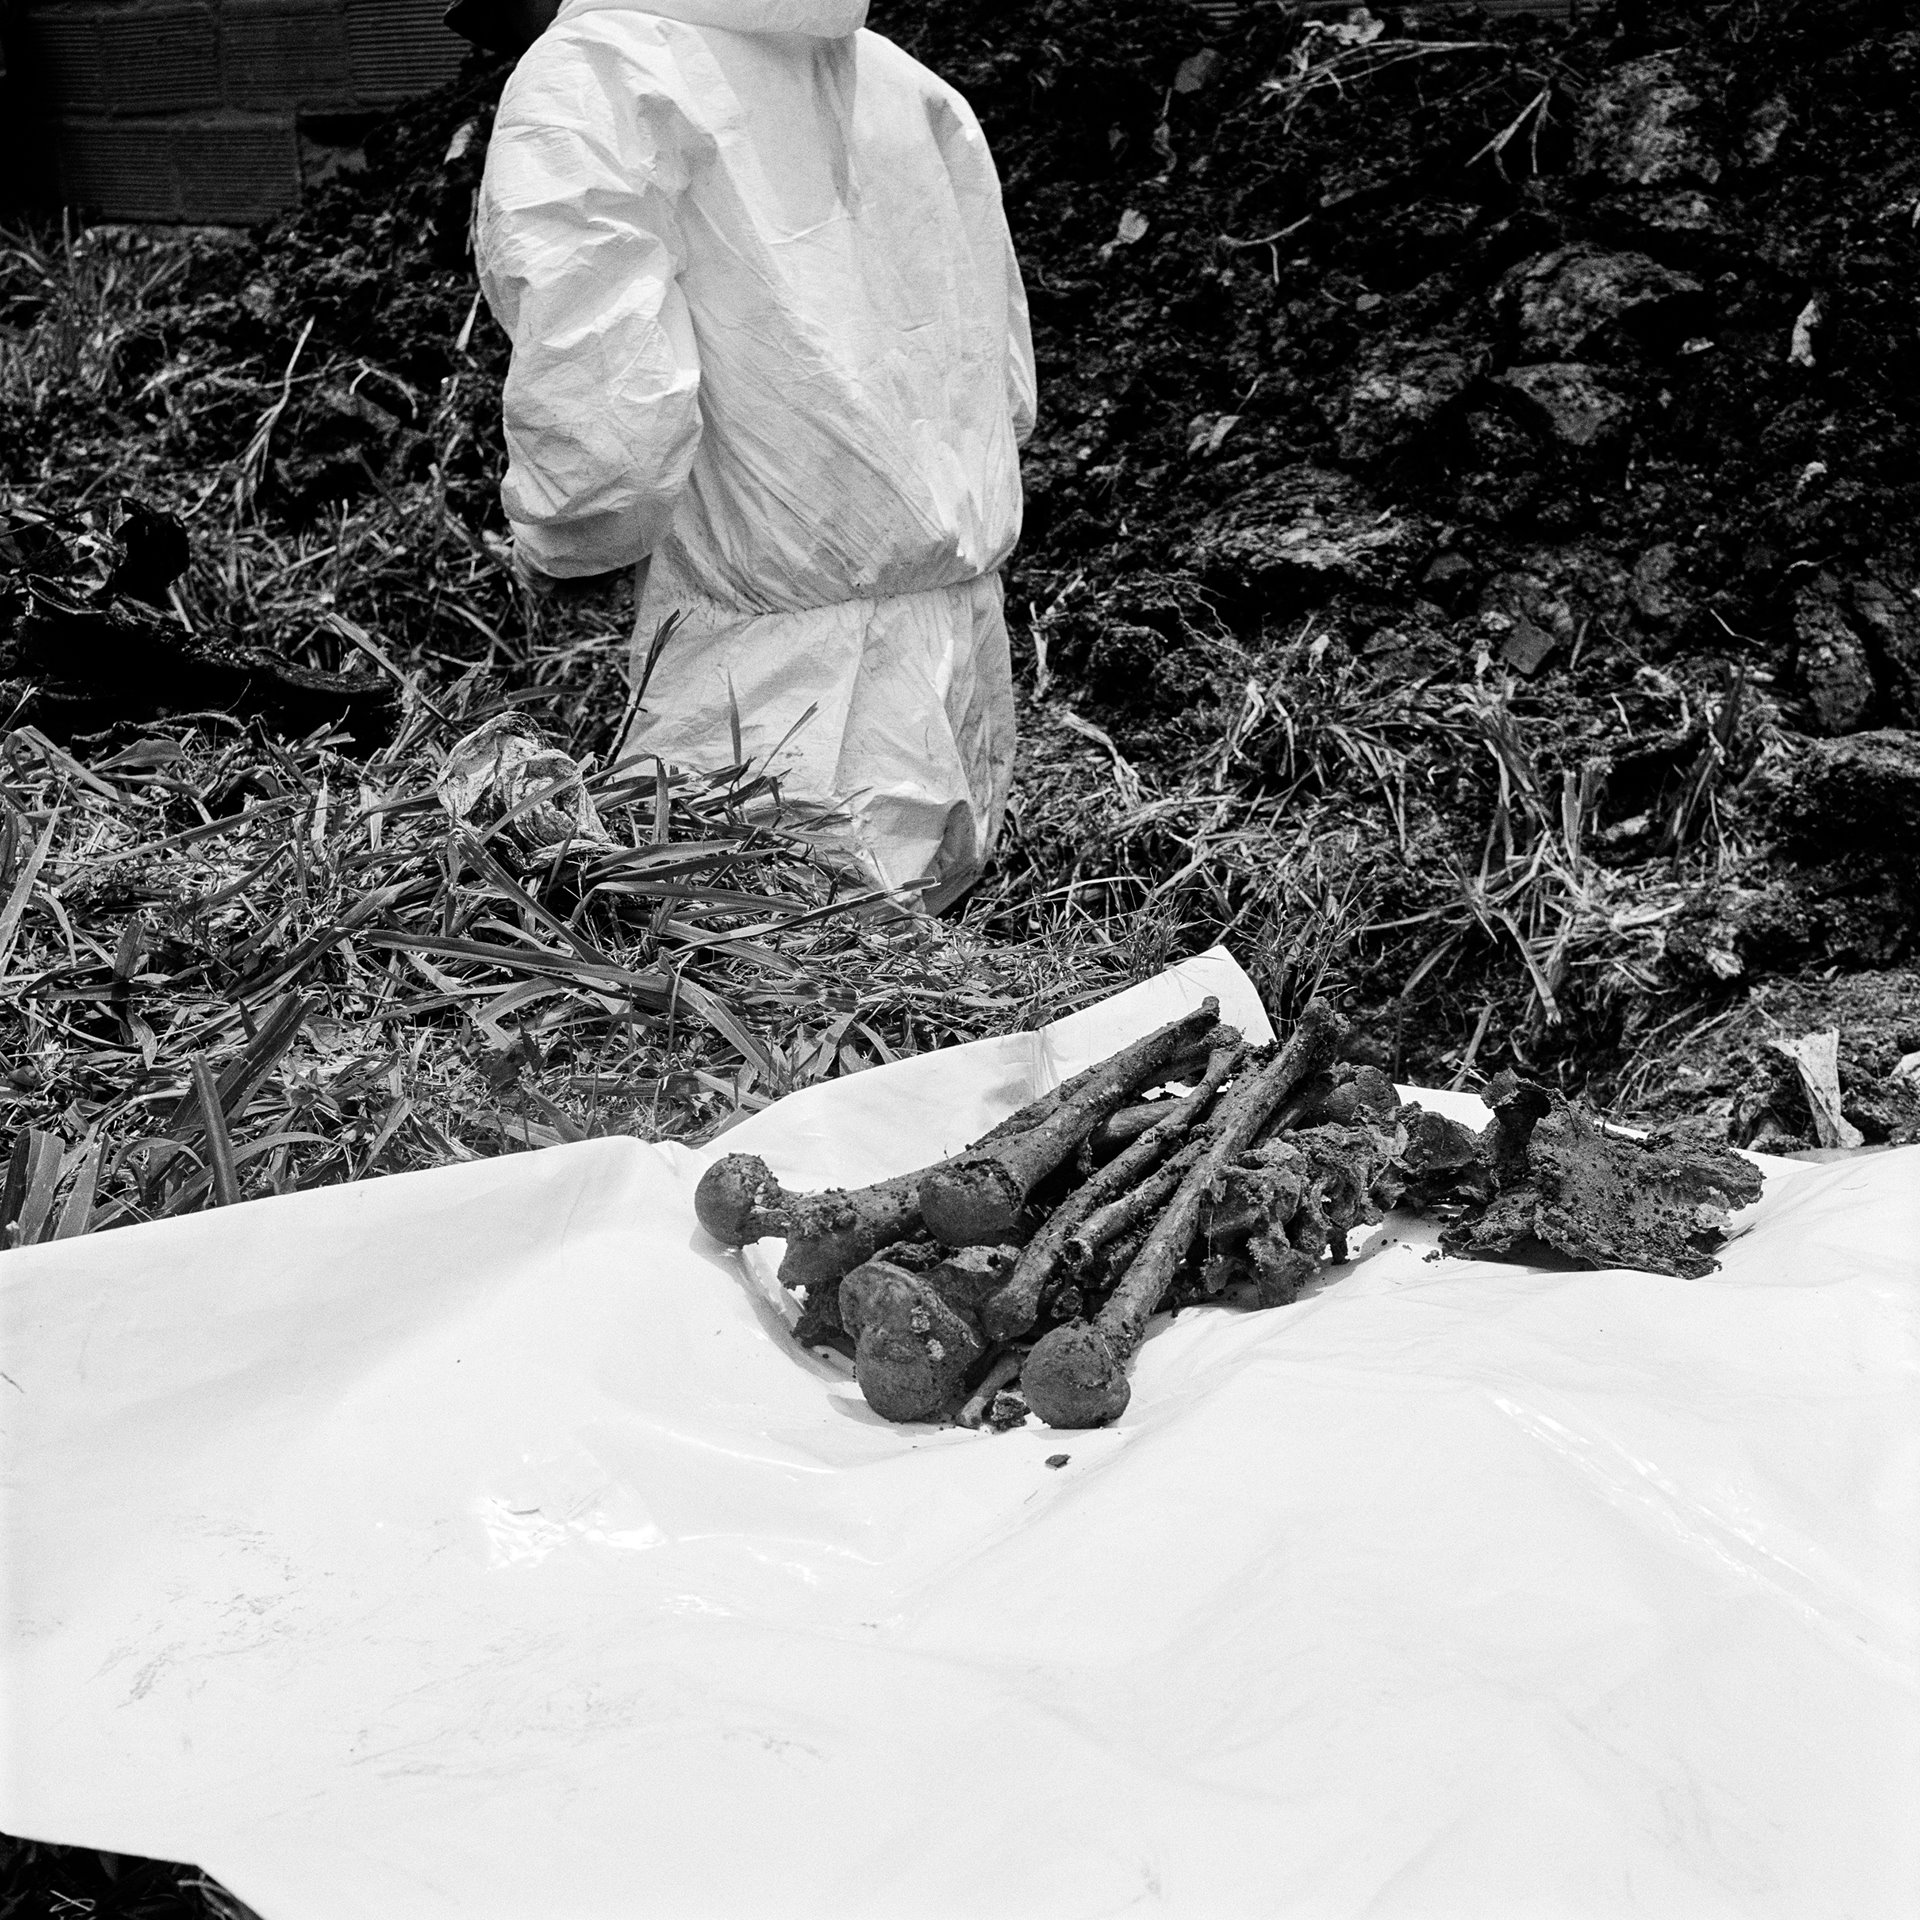 The remains of a body exhumed during a search for victims of Operación Orion lie laid out in the Jardín Cementerio Universal, in Medellín, Colombia. Operación Orion was an action by security forces against Medellín urban guerillas in 2002. Human rights and civil society organizations claim it to have been a joint operation between State forces and paramilitaries, or at least that there was cooperation with paramilitaries to some extent. The bodies of a number of people killed in the operation were buried, unregistered, in mass graves in the cemetery. After two weeks of excavations, a team of forensics found two of the nine bodies they were looking for.